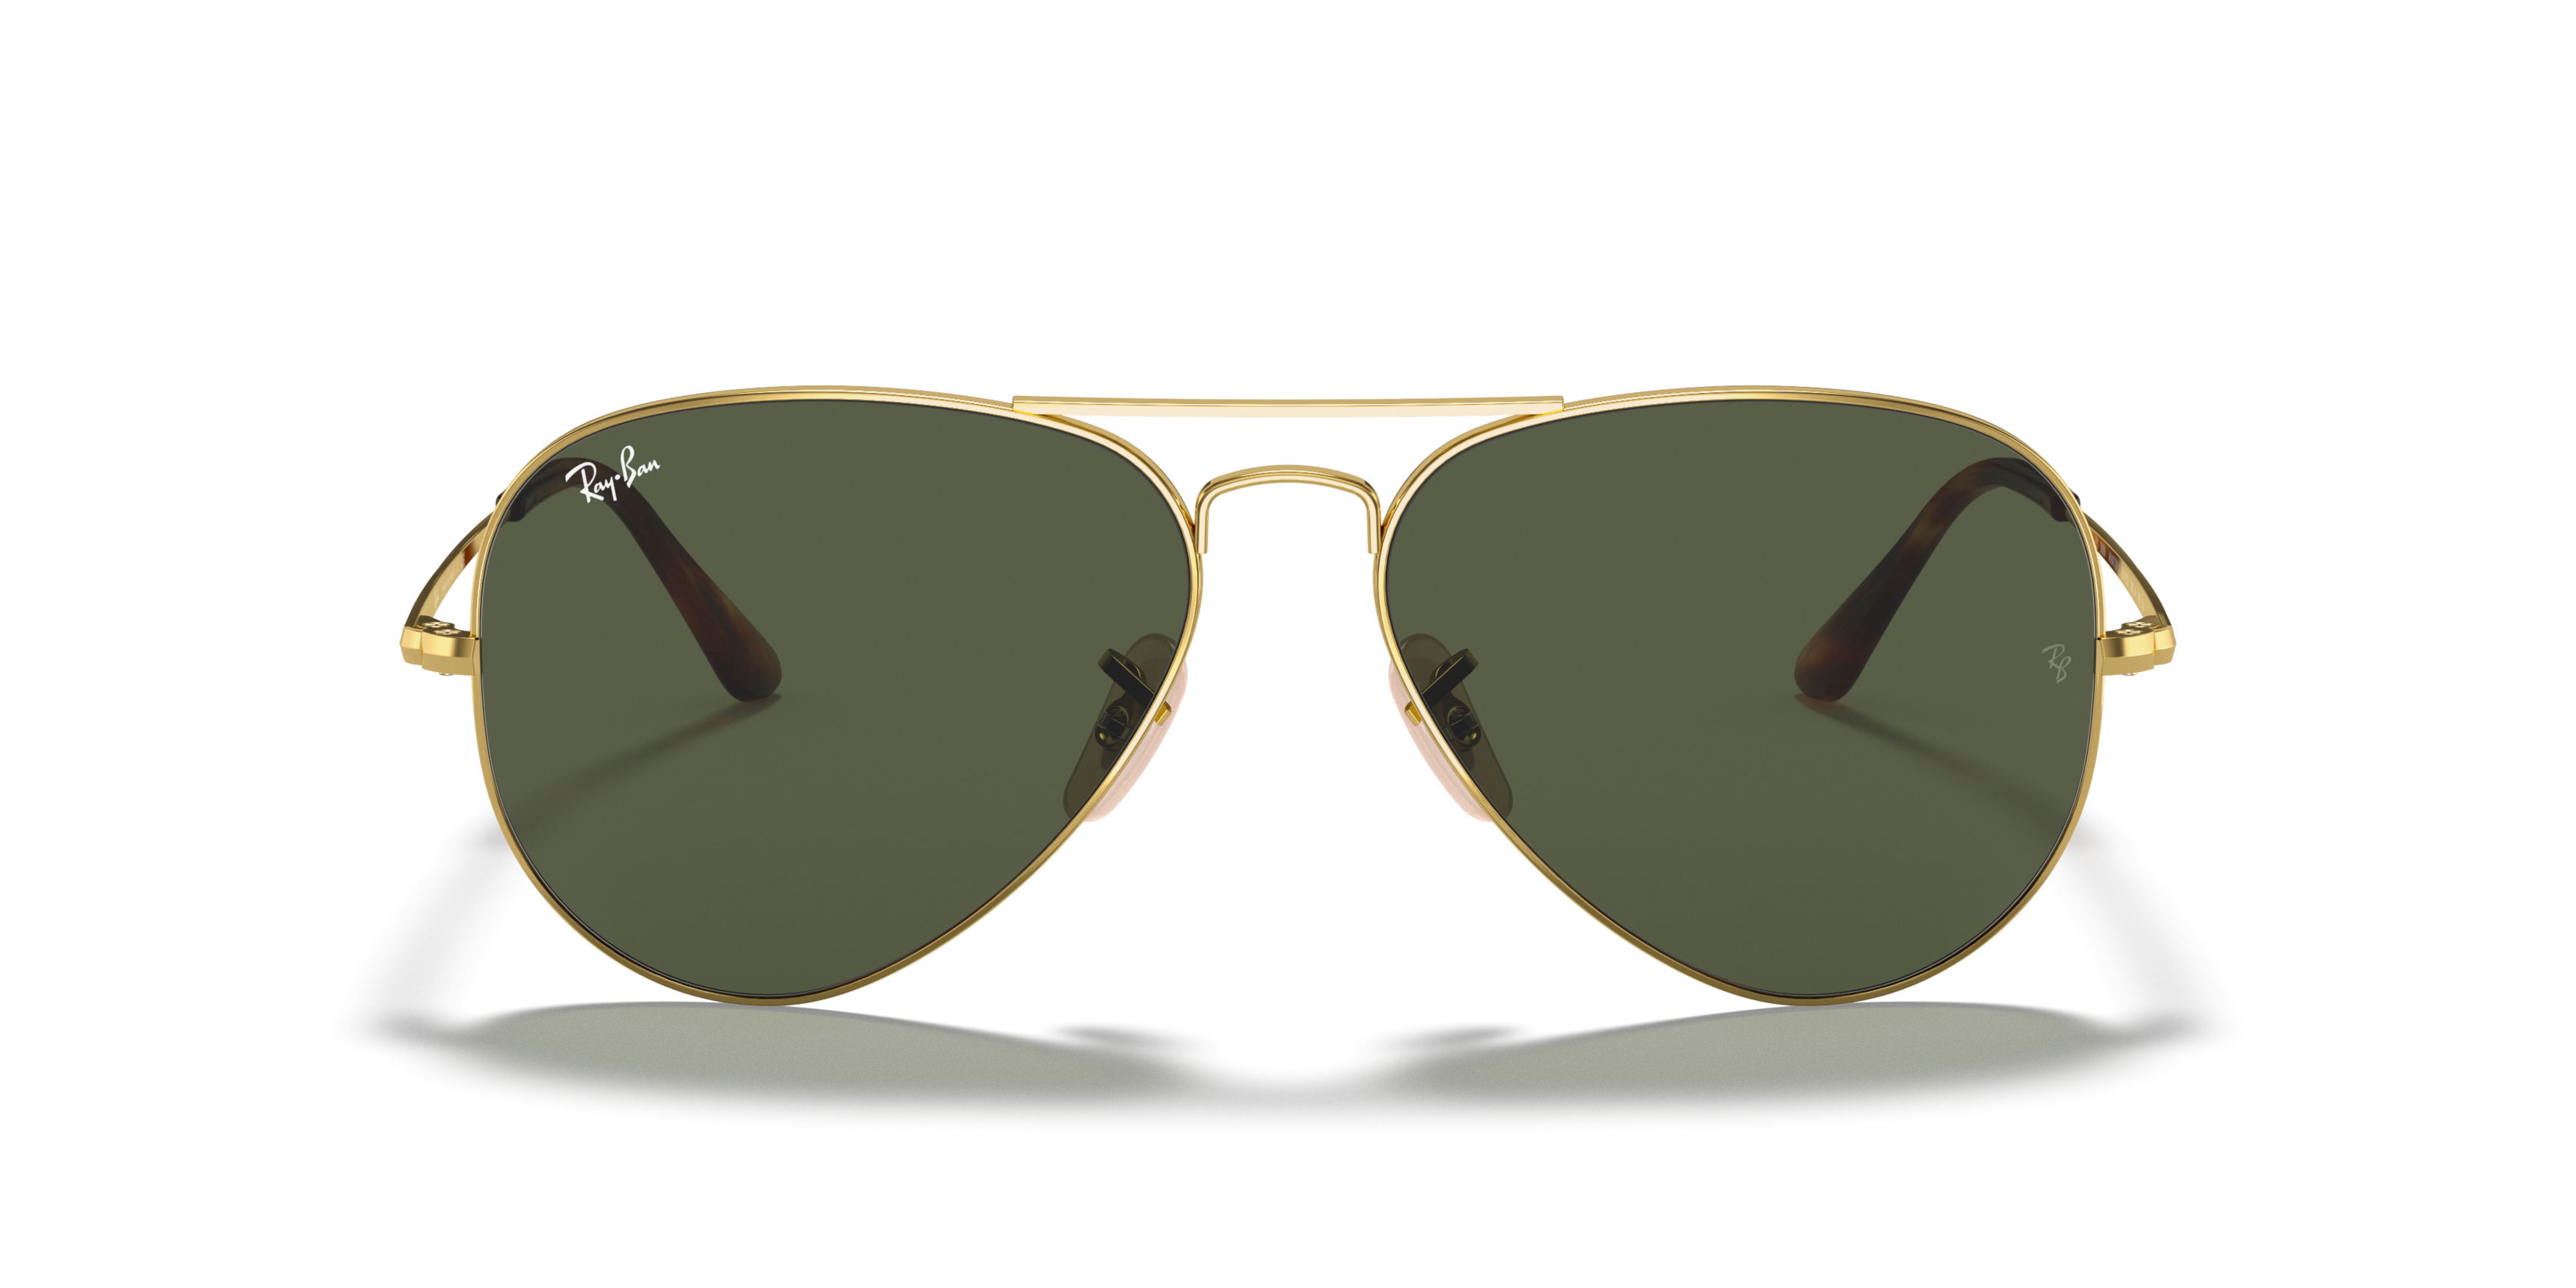 [products.image.front] RAY-BAN RB3689 914731